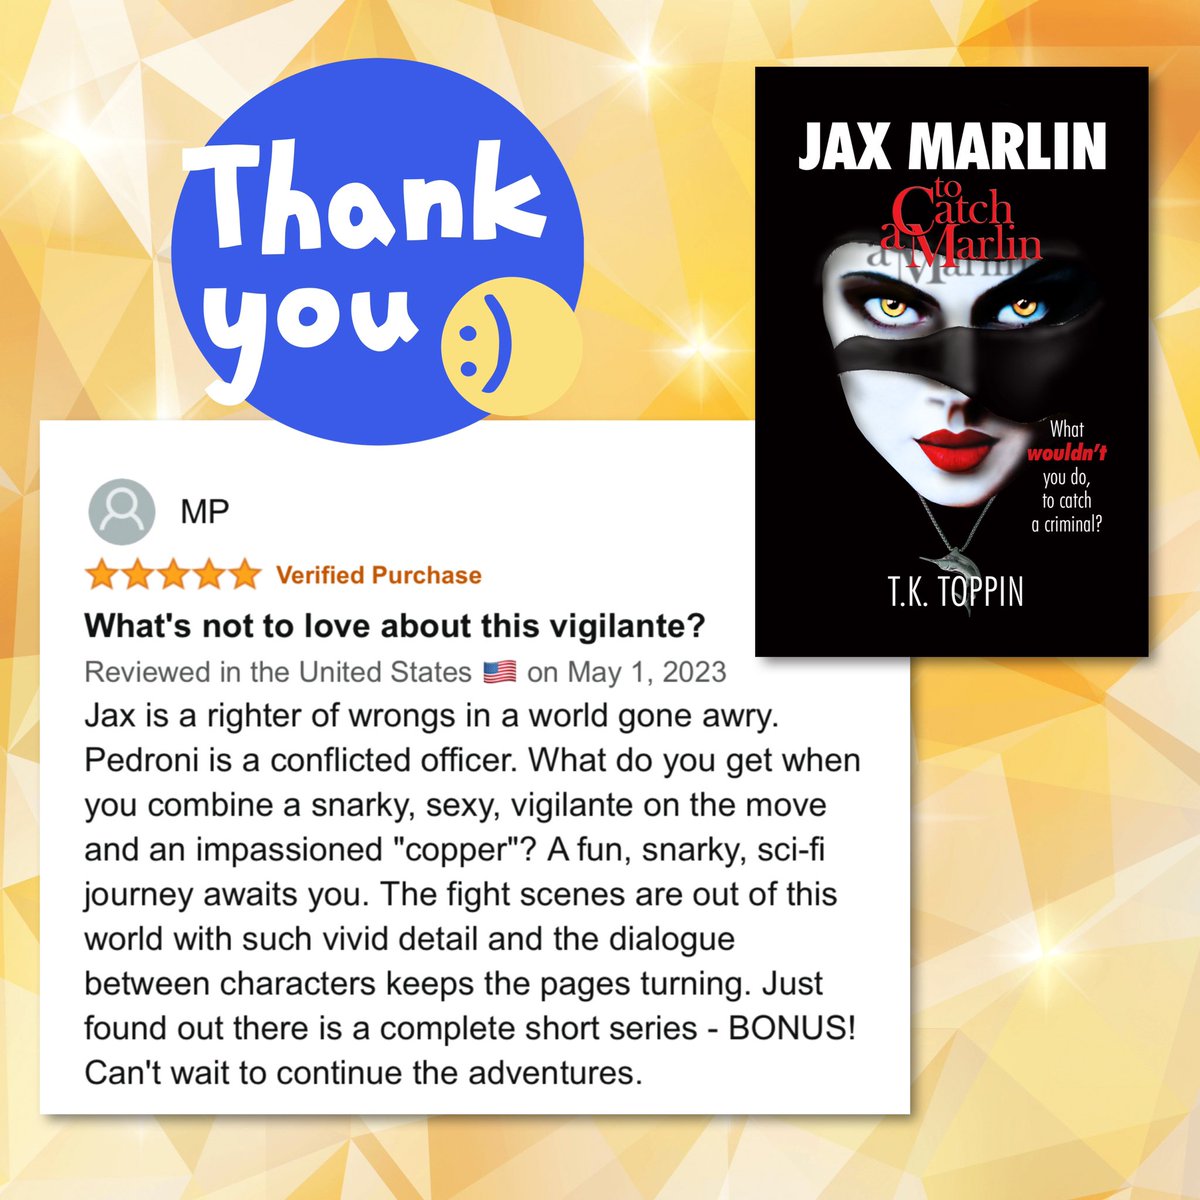 Love finding these #5Star reviews! Thank you!
#leaveareview #reviewshelpauthors #scifibooks #indiereads #detectivefiction #vigilantefiction #indiebooks